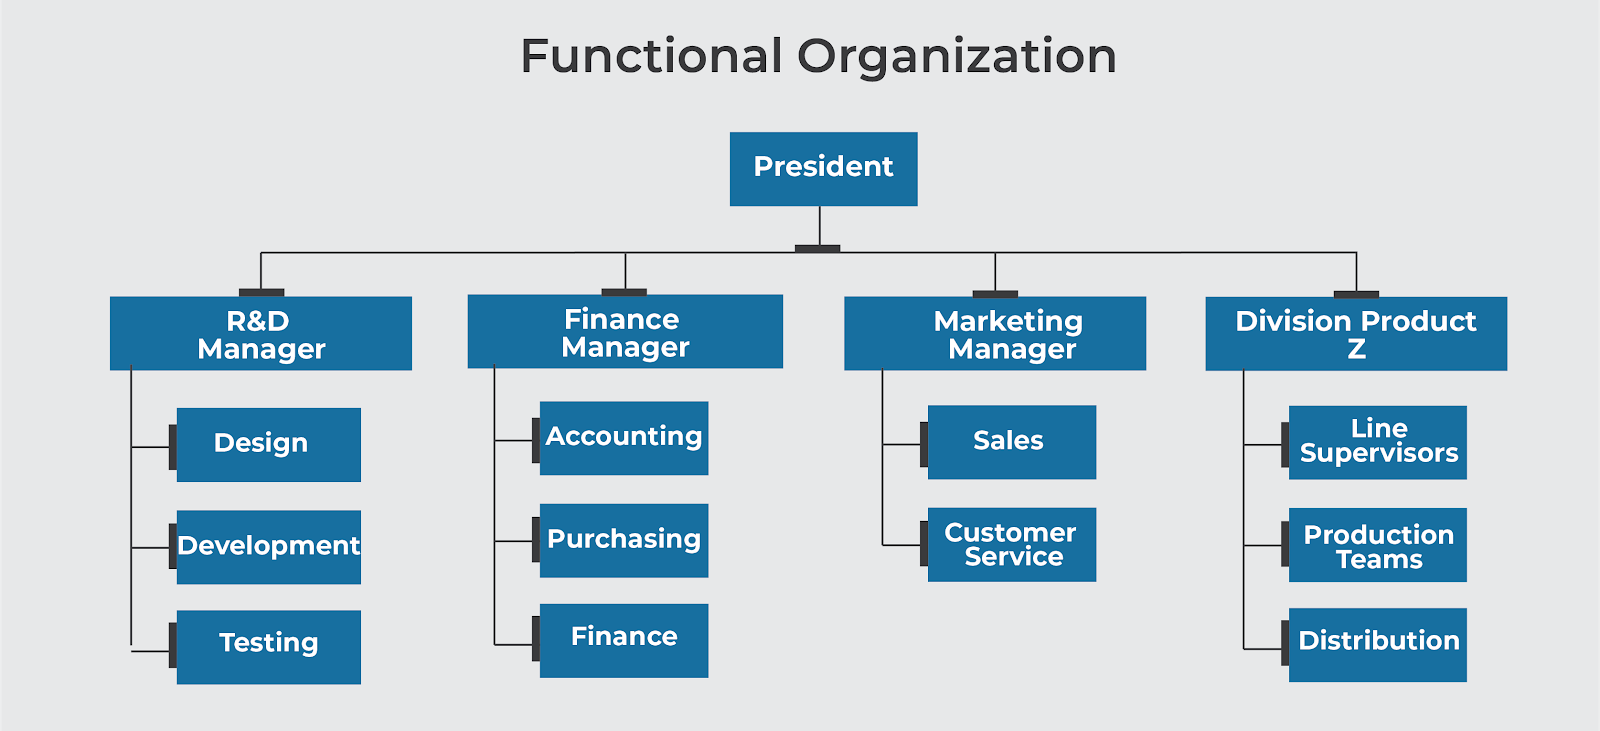 Organizational Chart For Community Immersion